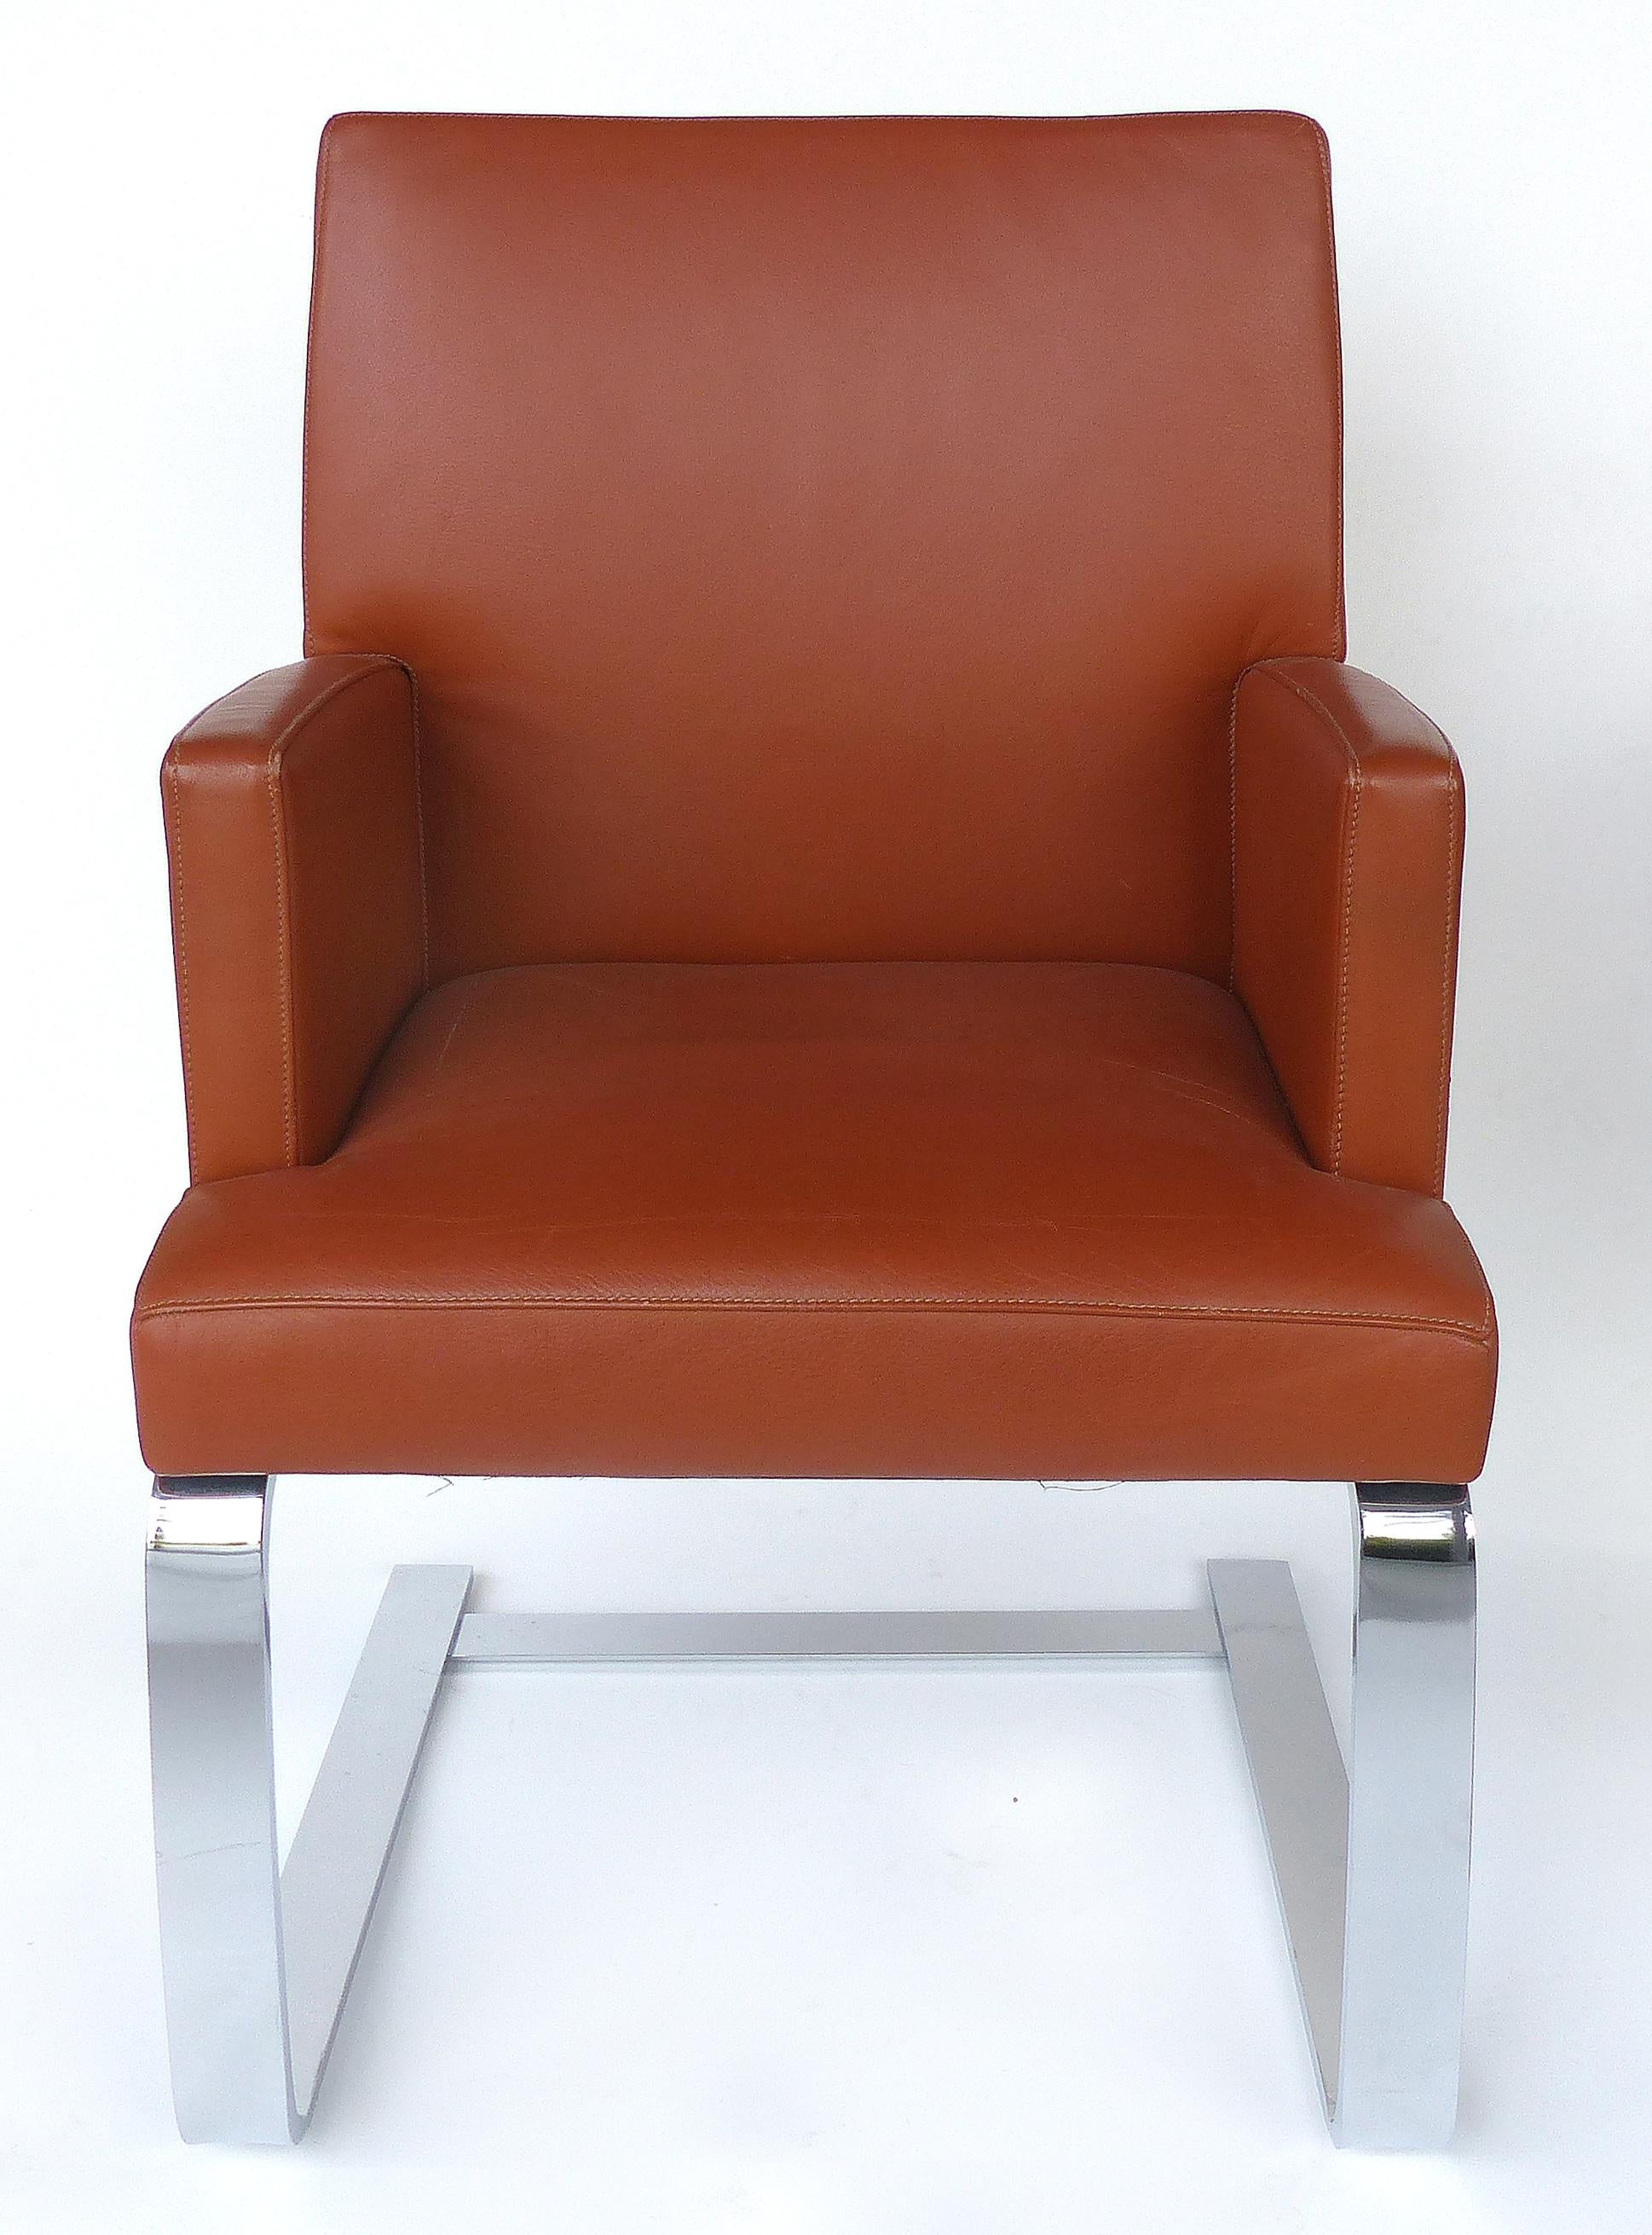 De Sede of Switzerland Cantilevered Leather and Stainless Steel Chairs, '4' 1